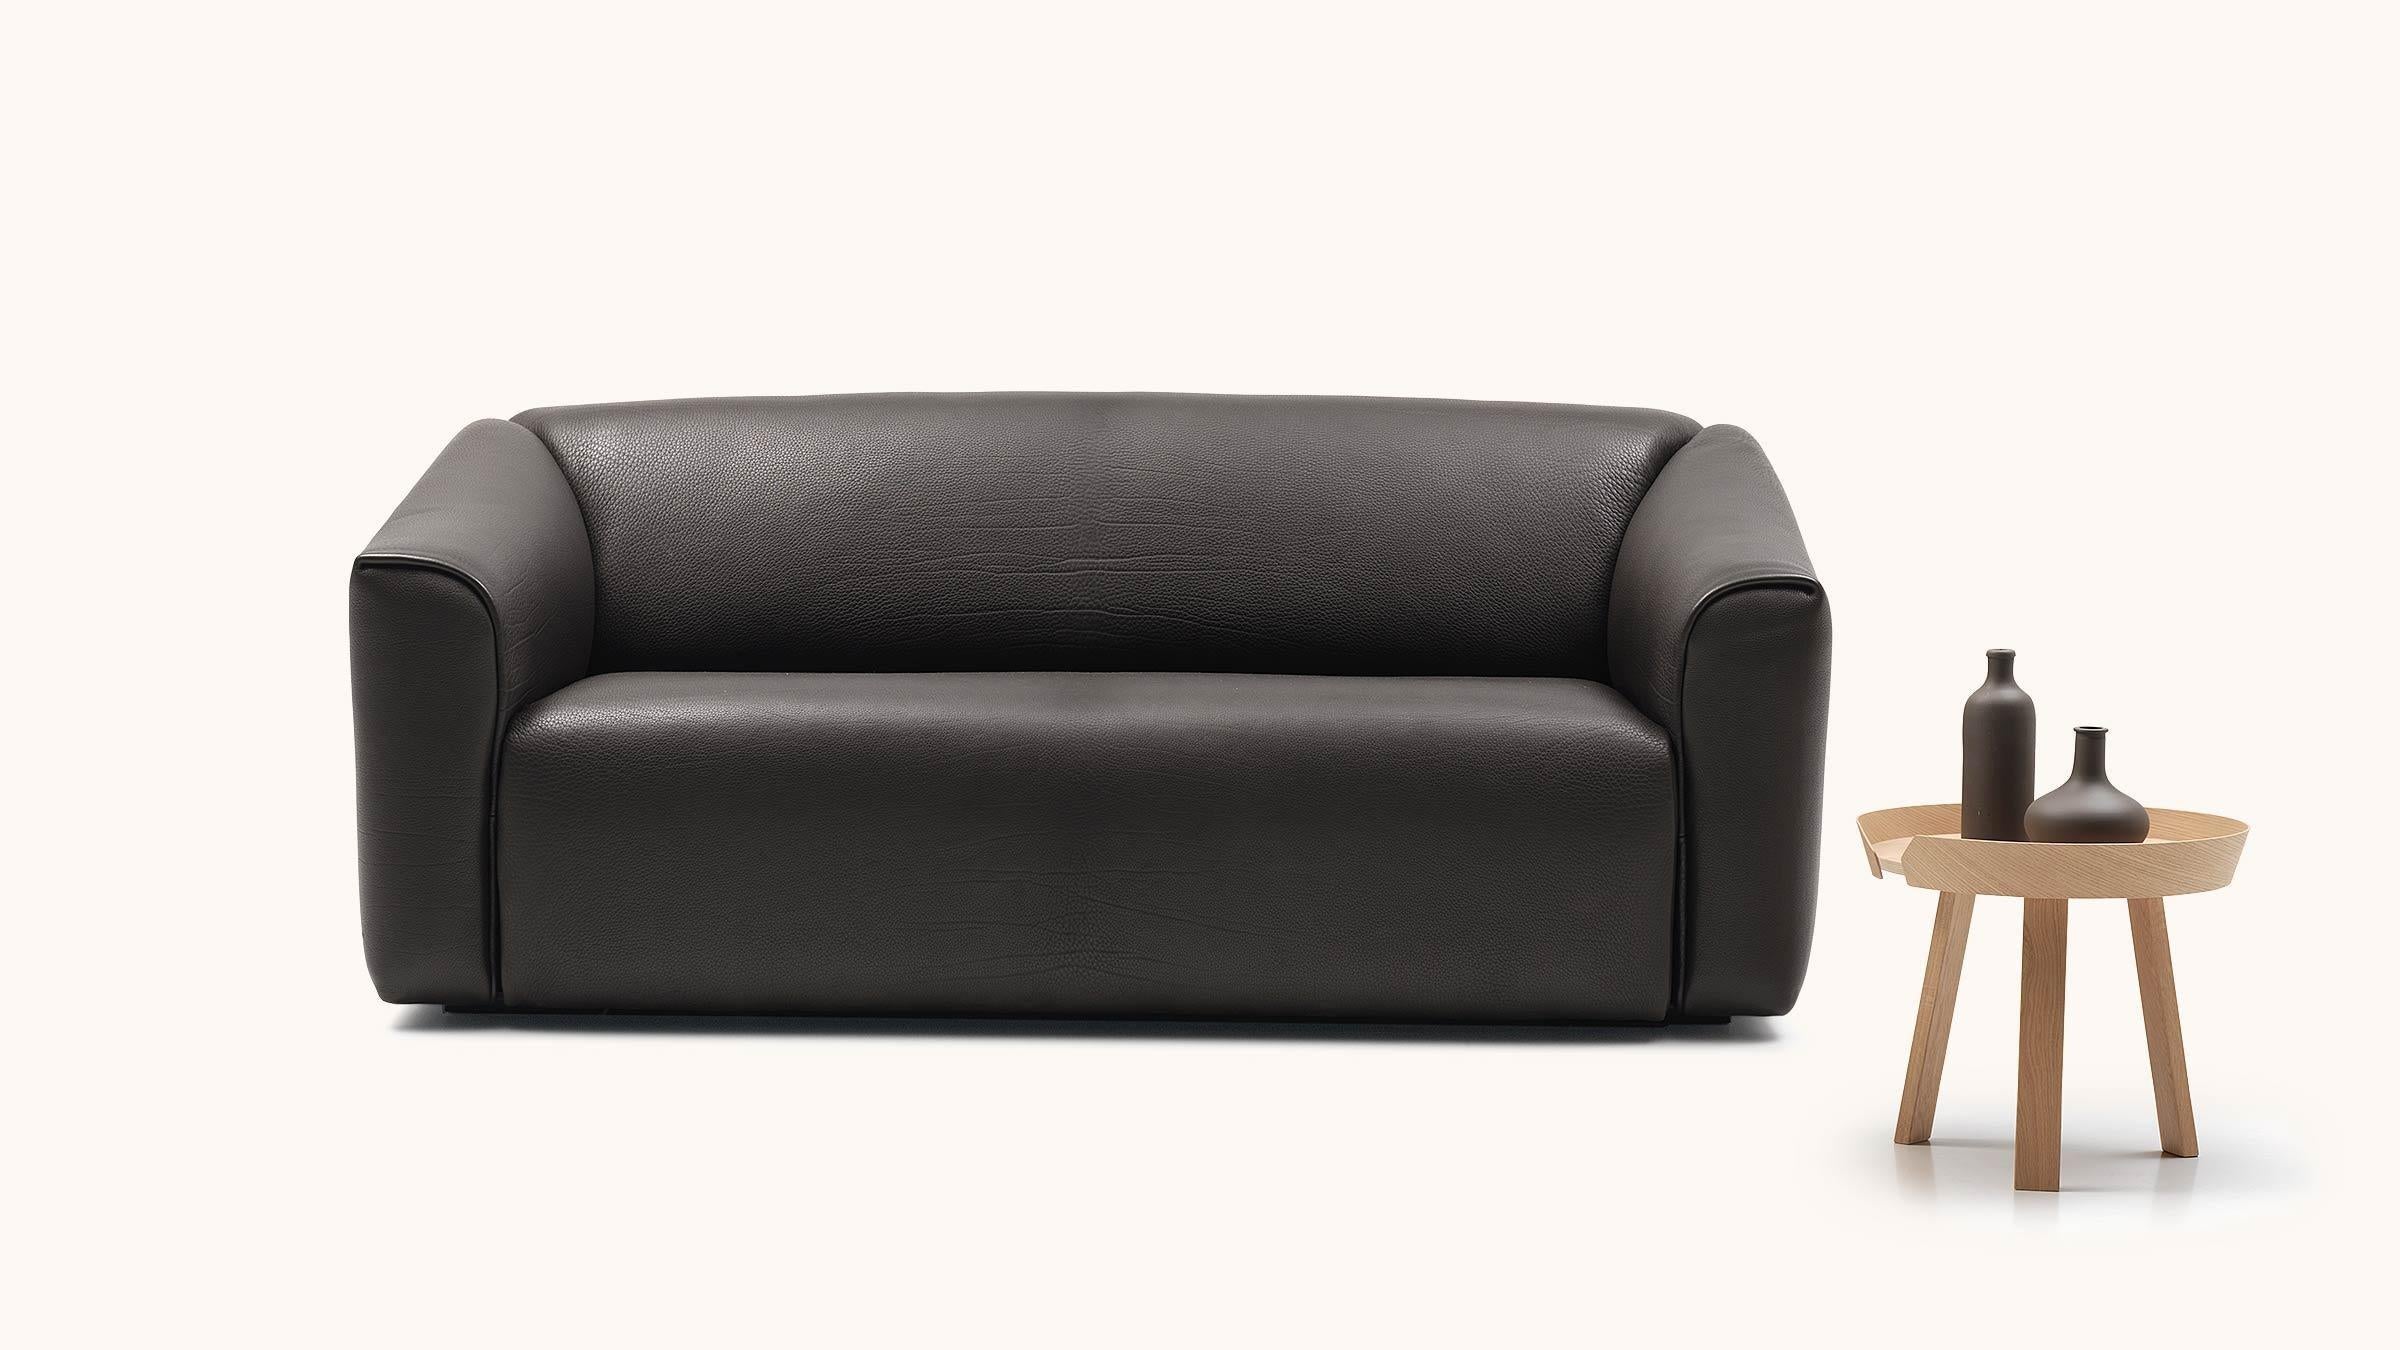 DS-47 is available as a two- and three-seat sofa, and as an armchair and stool; 5-mm-thick Neck leather recognizable in characteristic fat wrinkles lend it an unmistakable expression that makes it easy to spot. For all the parts required for